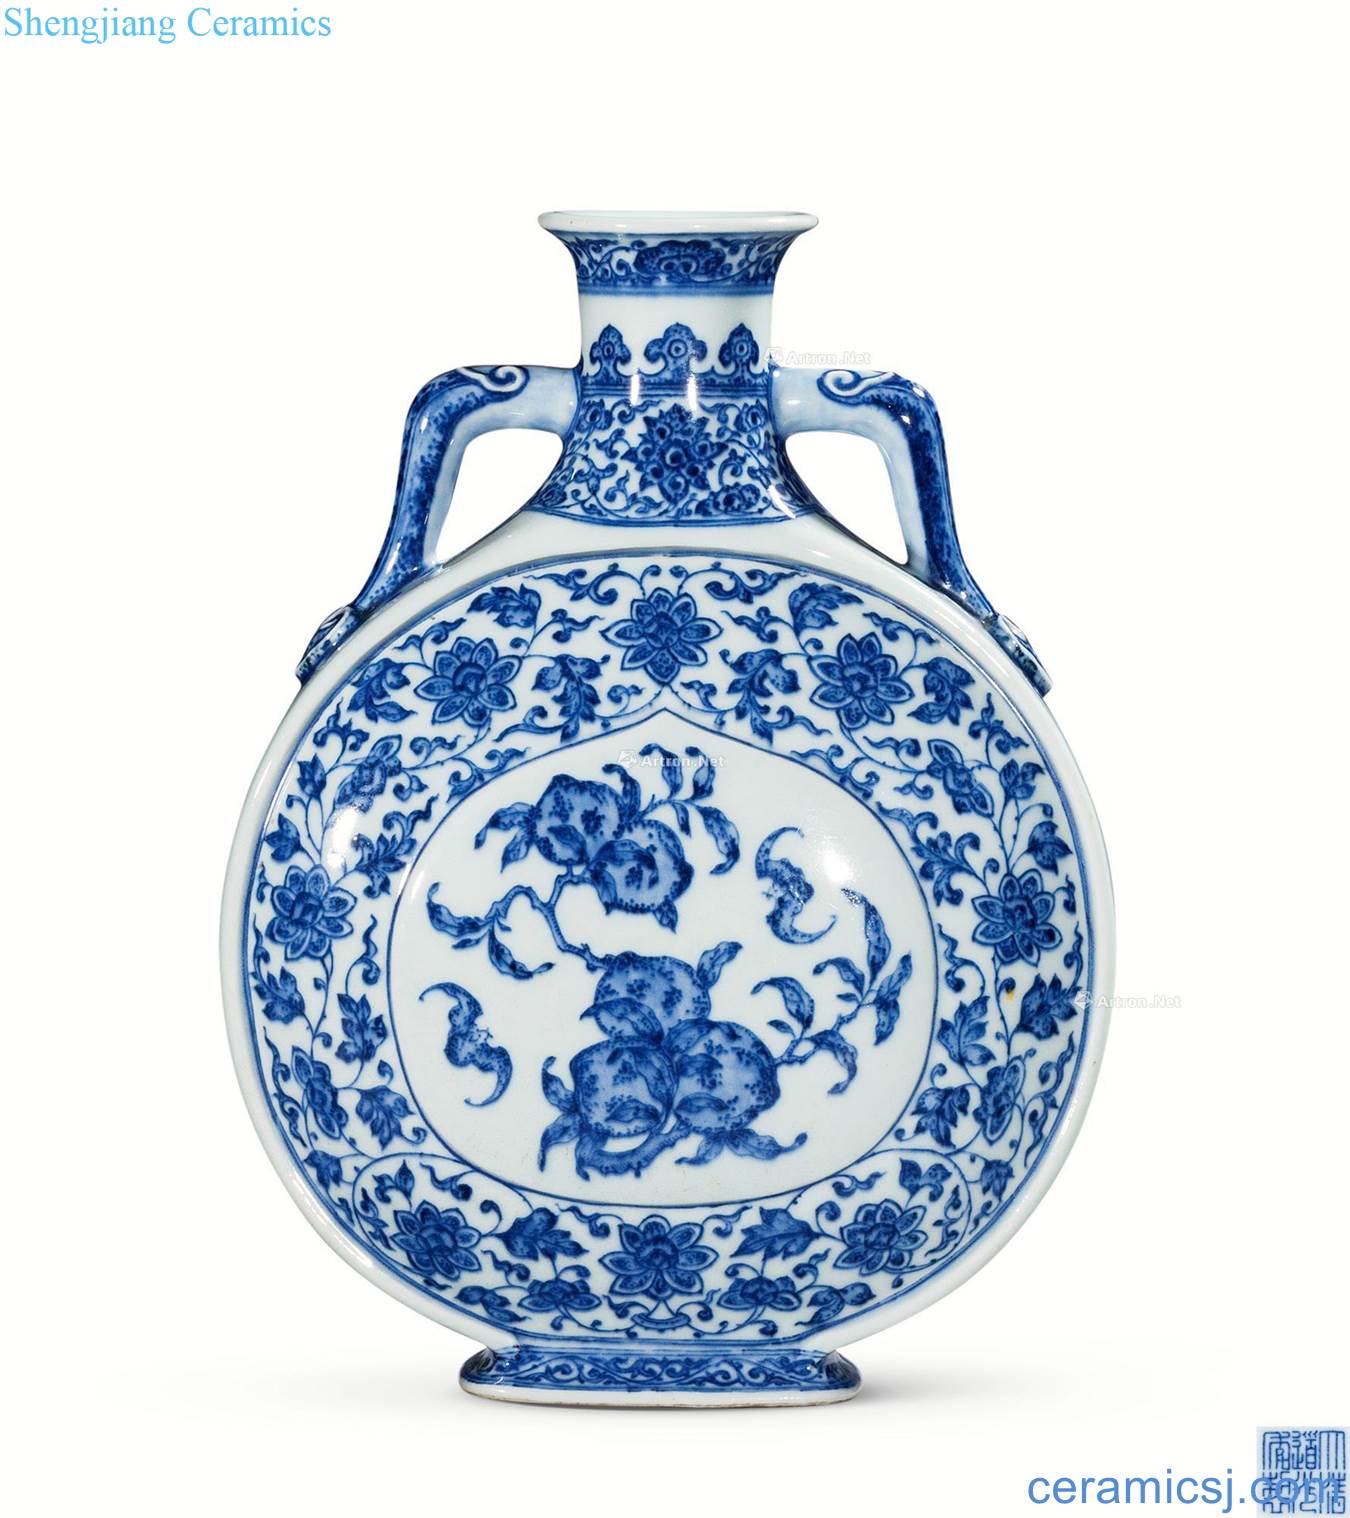 Qing daoguang Blue and white ruffled branch flowers and grain on bottle